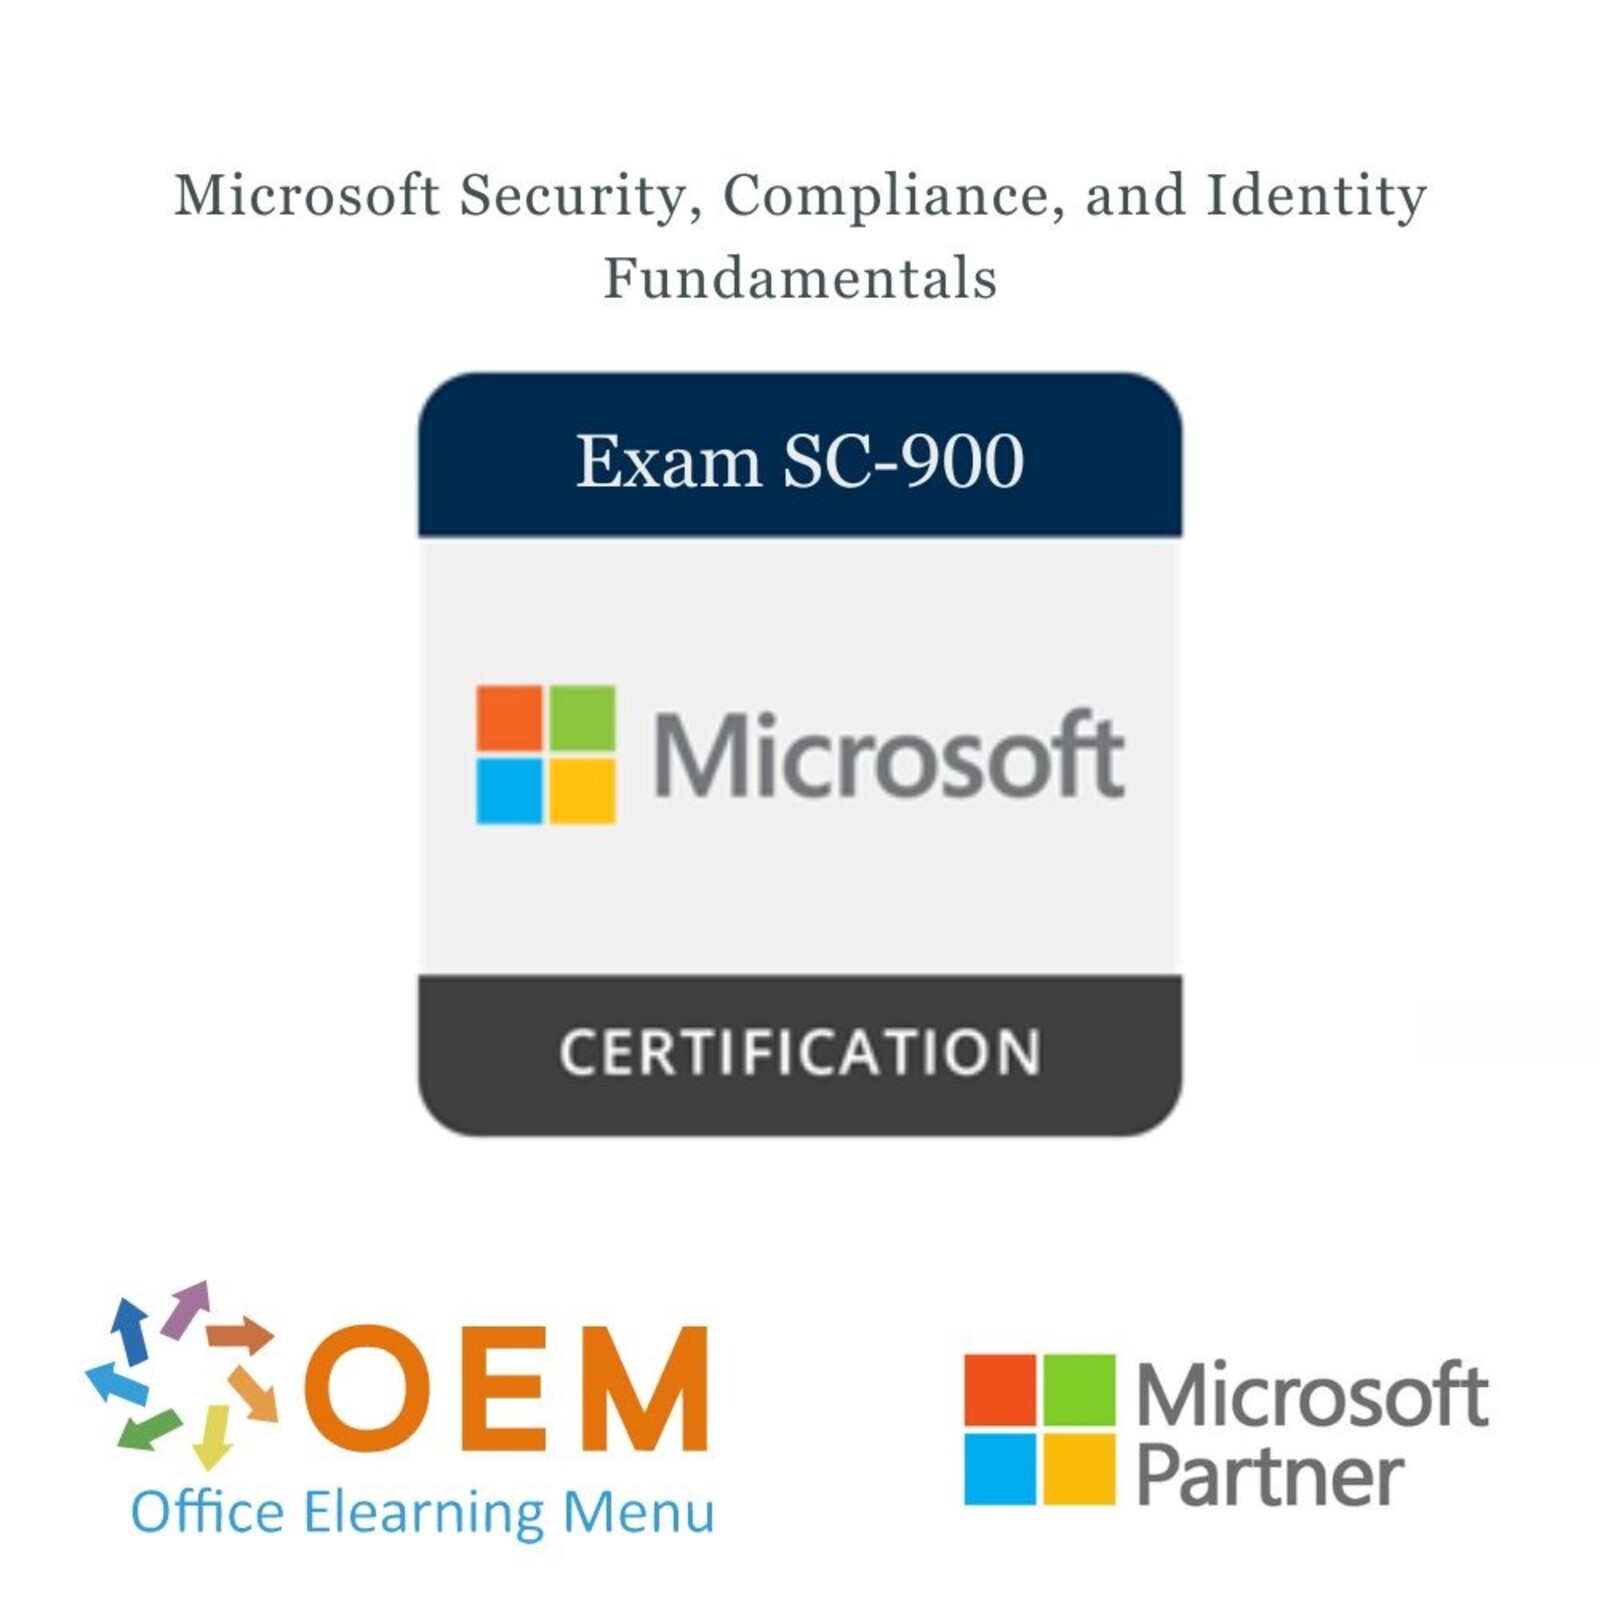 Certiport - Pearson Vue Exam SC-900 Microsoft Security, Compliance, and Identity Fundamentals